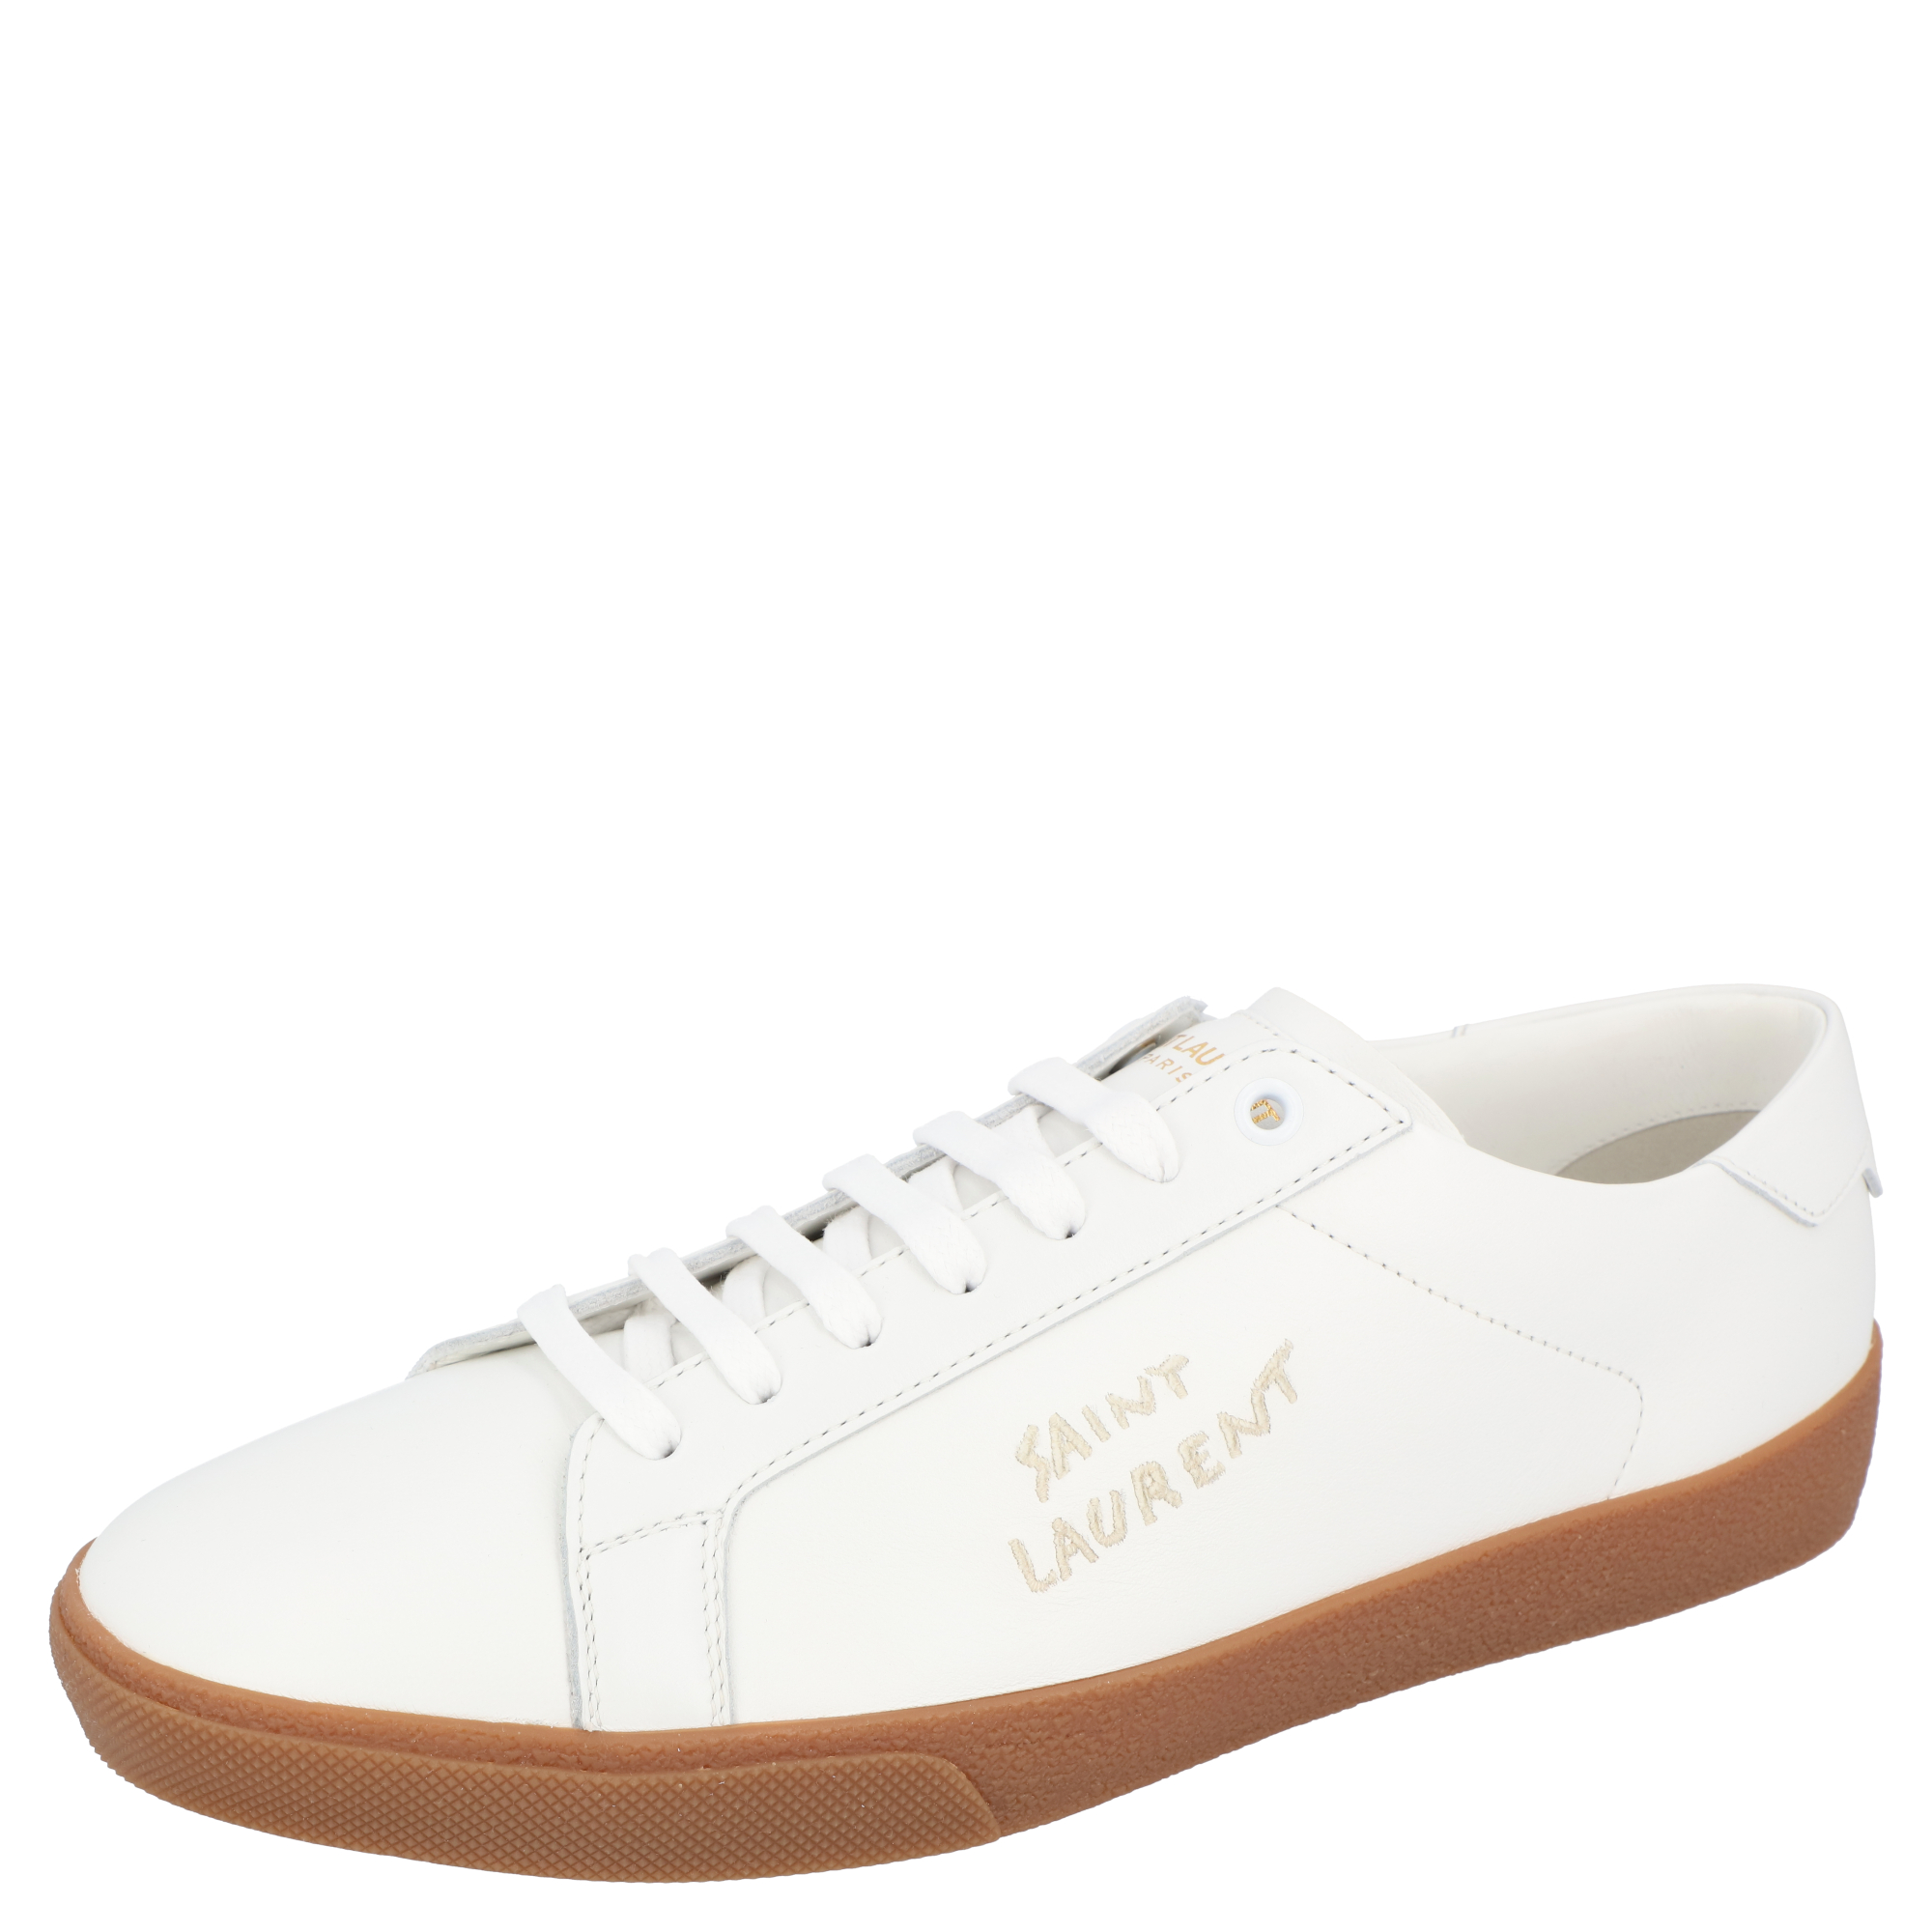 Pre-owned Saint Laurent White Leather Sl/06 Embroidered Court Classic Sneakers Size Eu 43